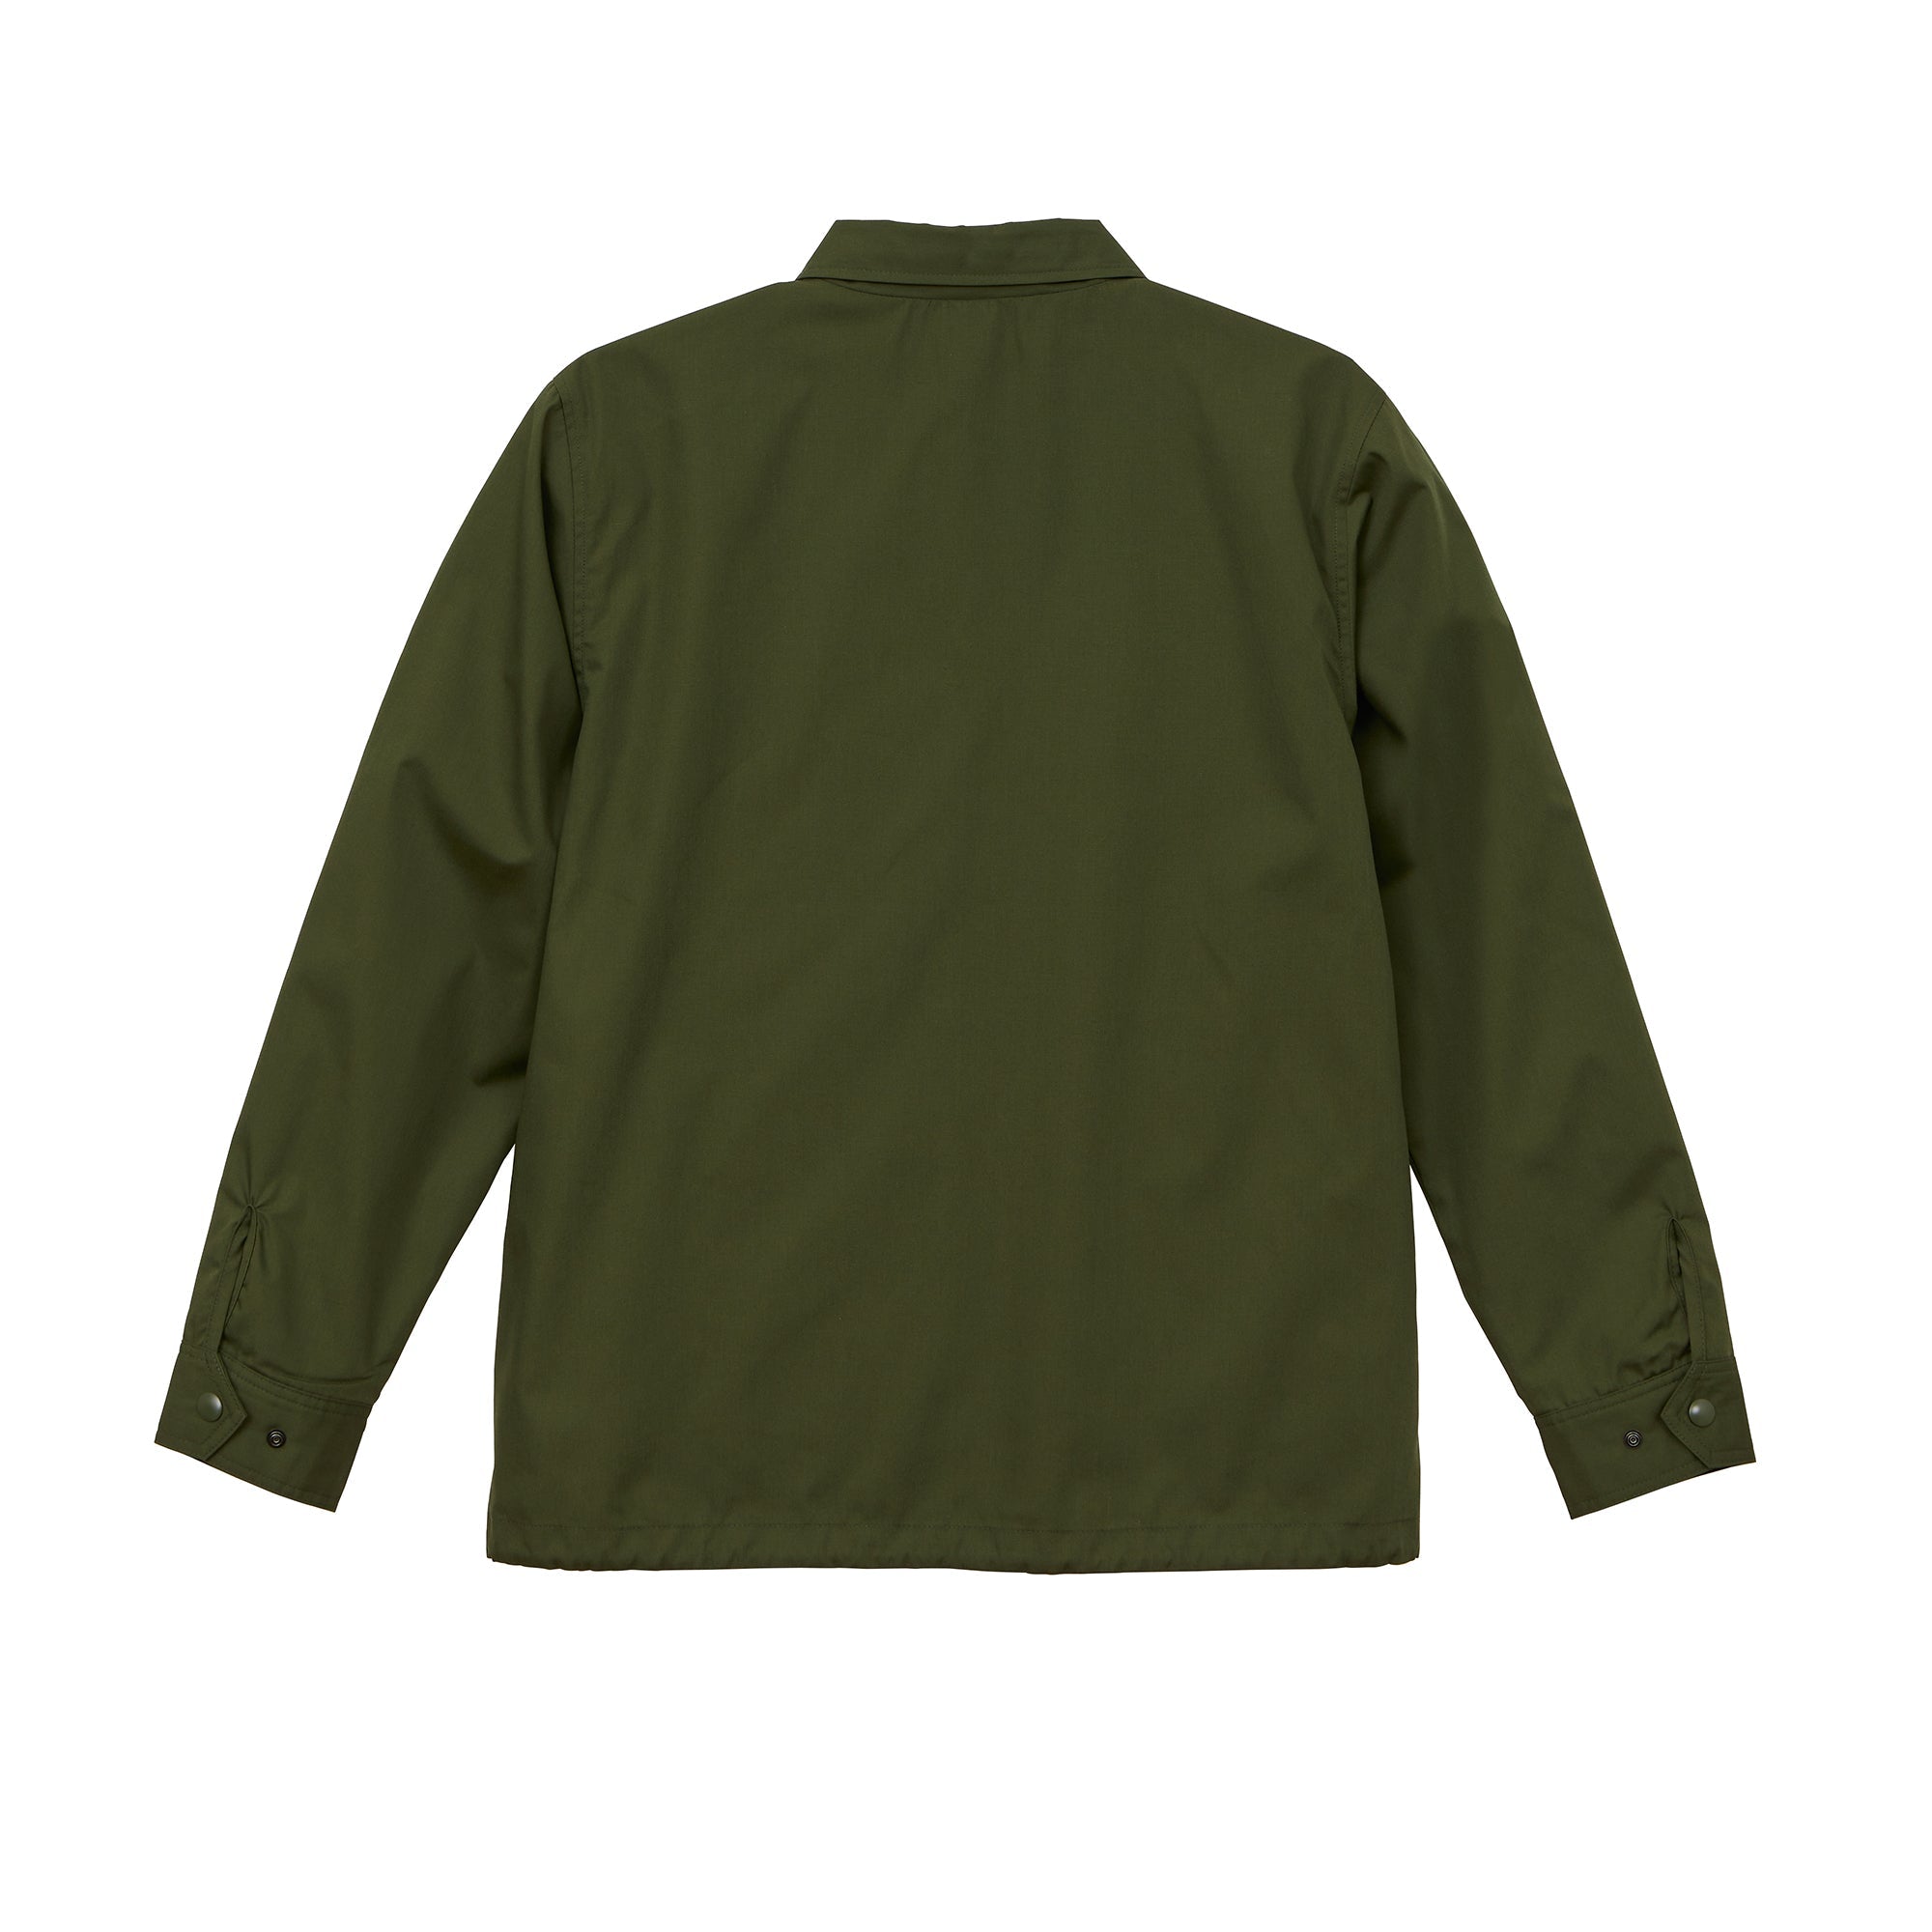 7448 - Lined Coach jacket (water repellent) - Olive x 2